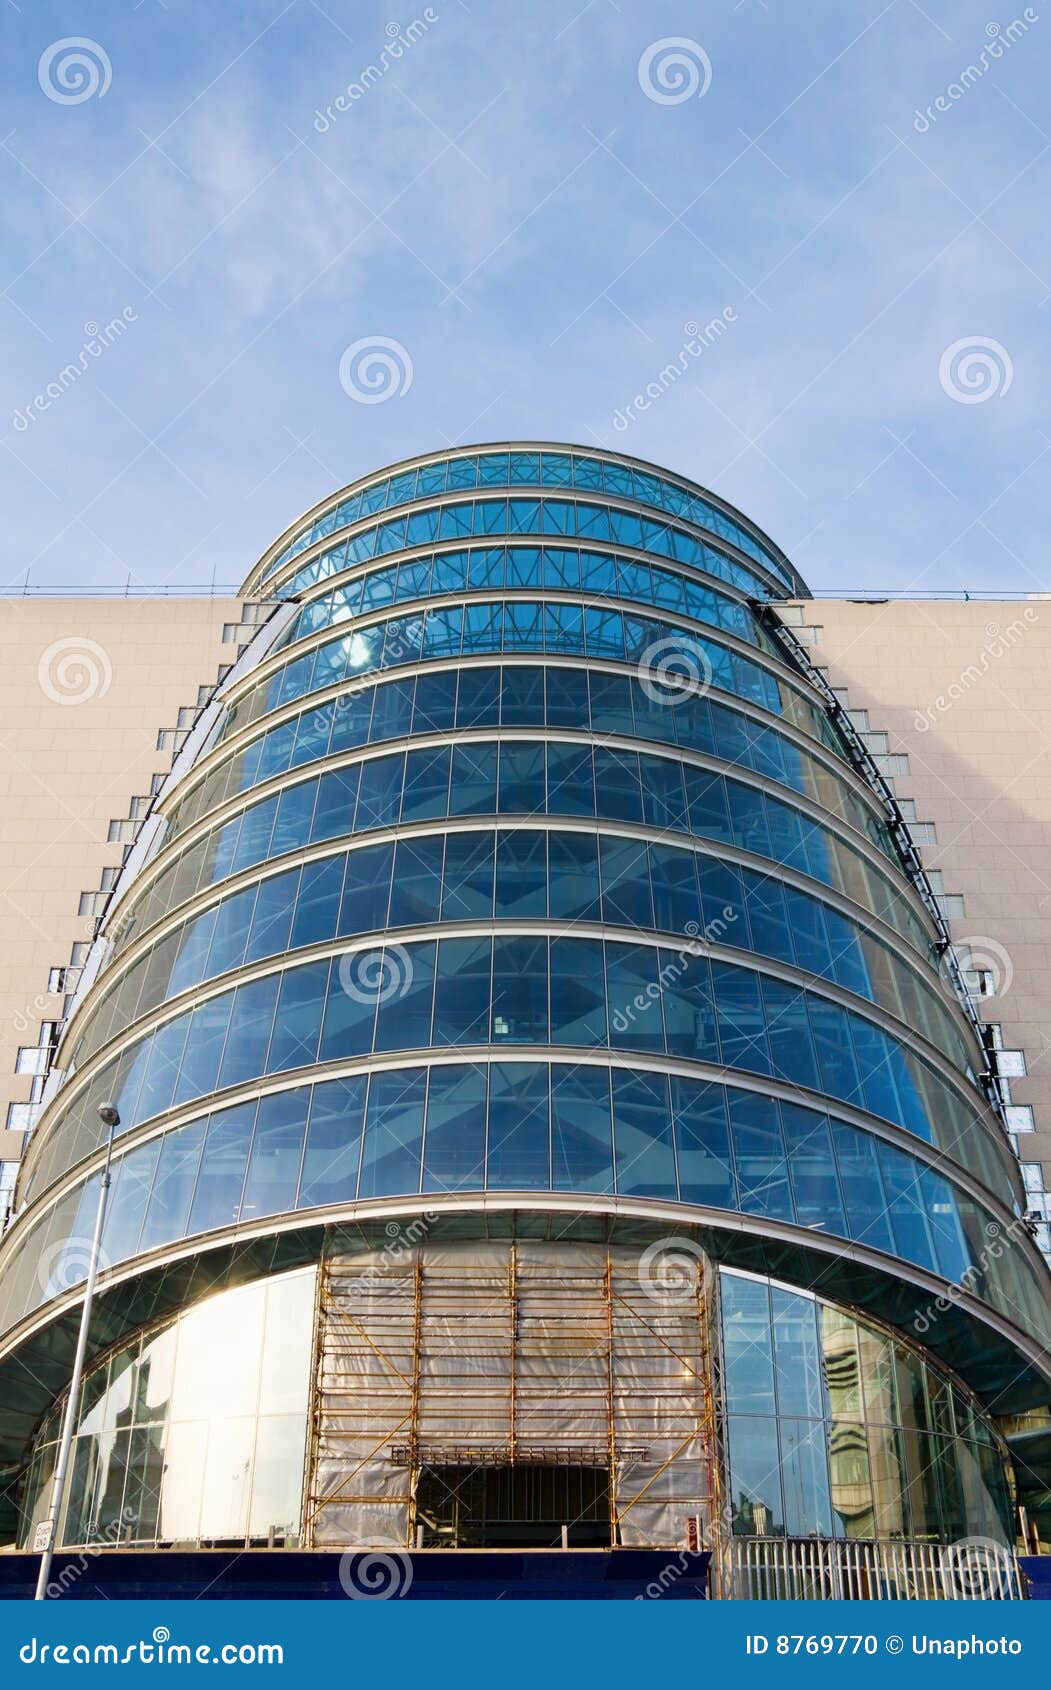 Building The Future With Modern Architecture Stock Photo  Image 